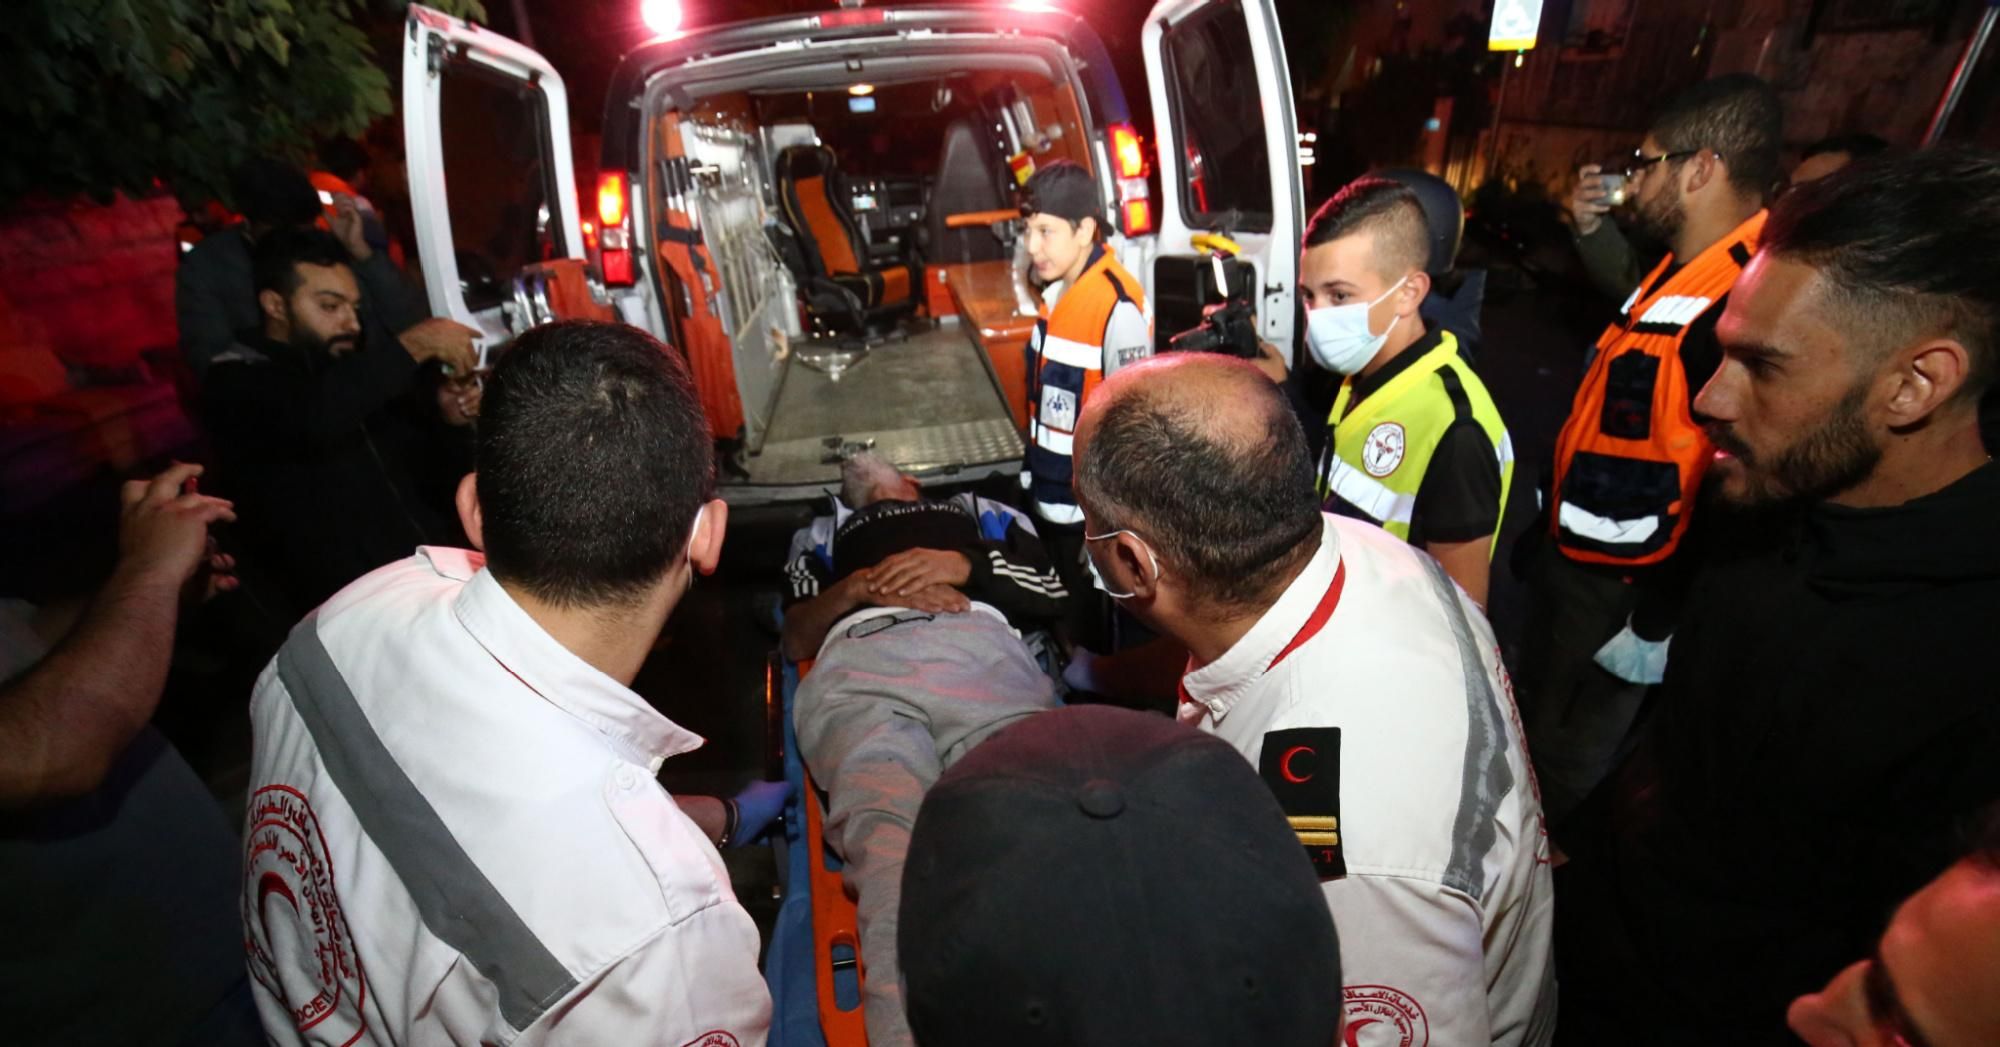 Injured Palestinian Salih Diyab is carried to an ambulance after Israeli forces cracked down on demonstrations against the forced eviction of Palestinian families from their homes in East Jerusalem's Sheikh Jarrah neighborhood on May 6, 2021. (Photo: Mostafa Alkharouf/Anadolu Agency via Getty Images)